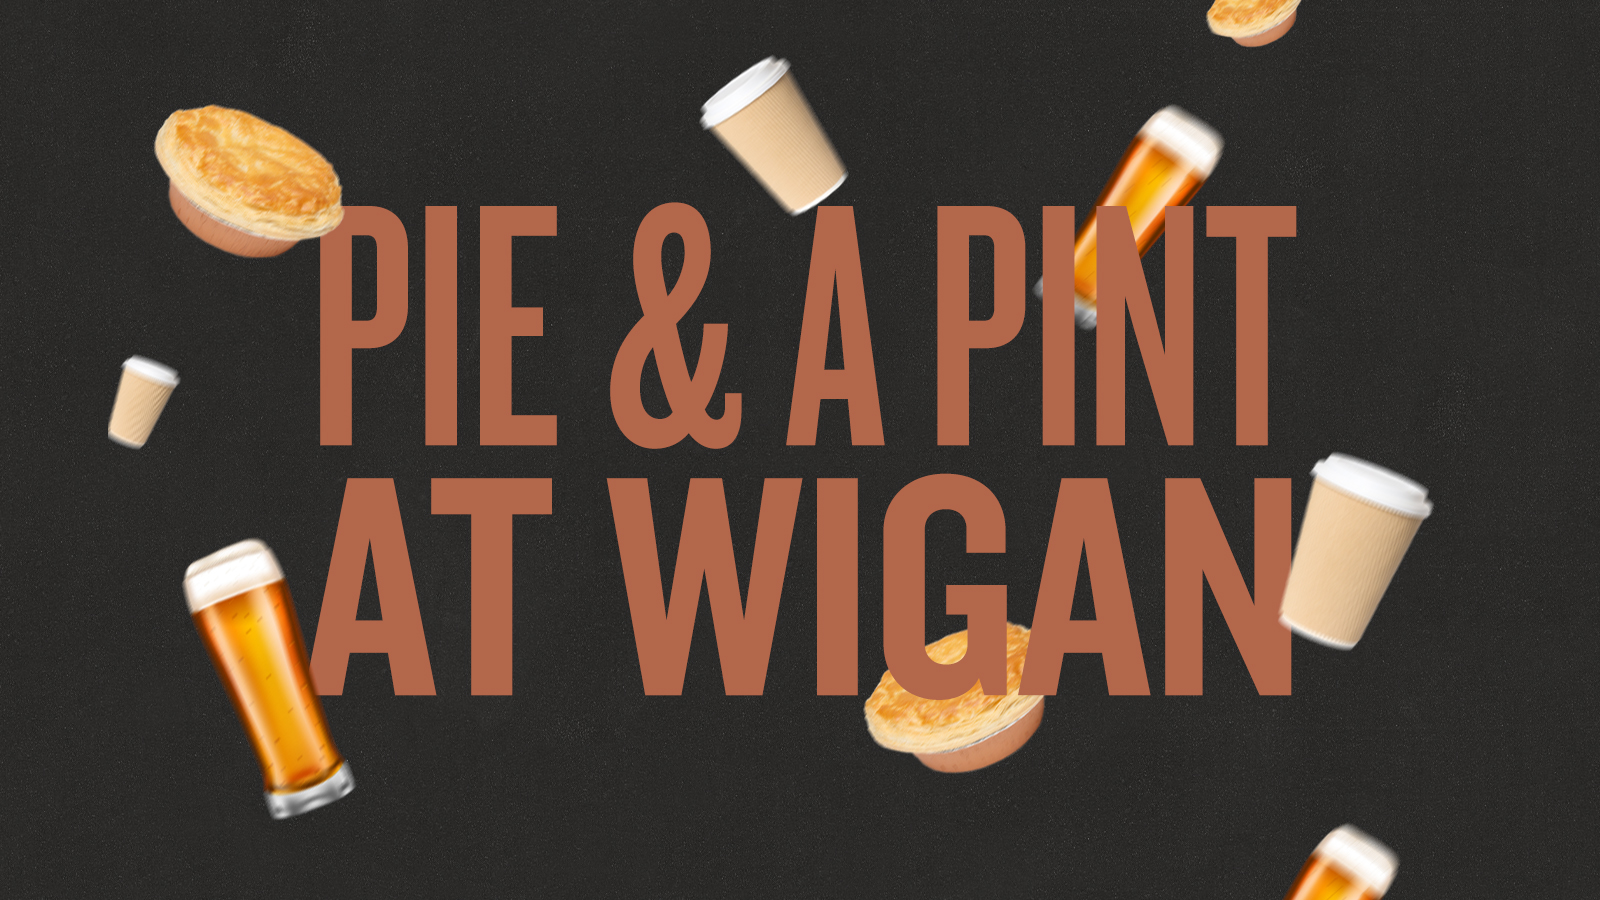 Wigan pie and pint